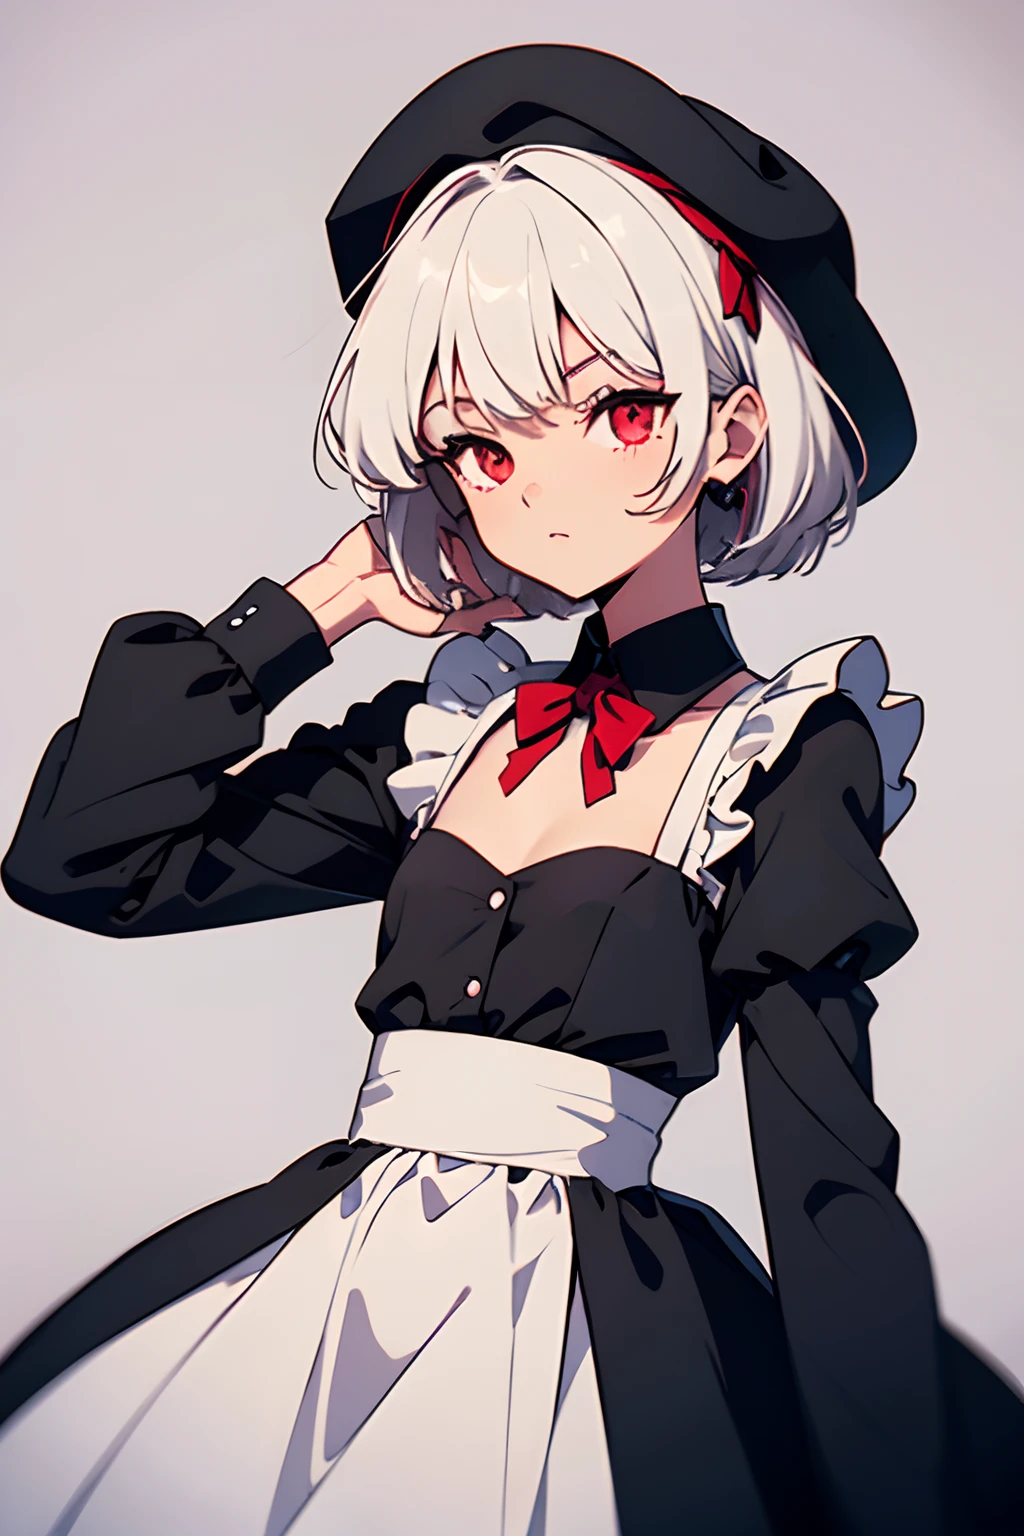 Red eyes, short white hair, maid dress, flat chest, soft hat, bore expression, long sleeves, black long dress